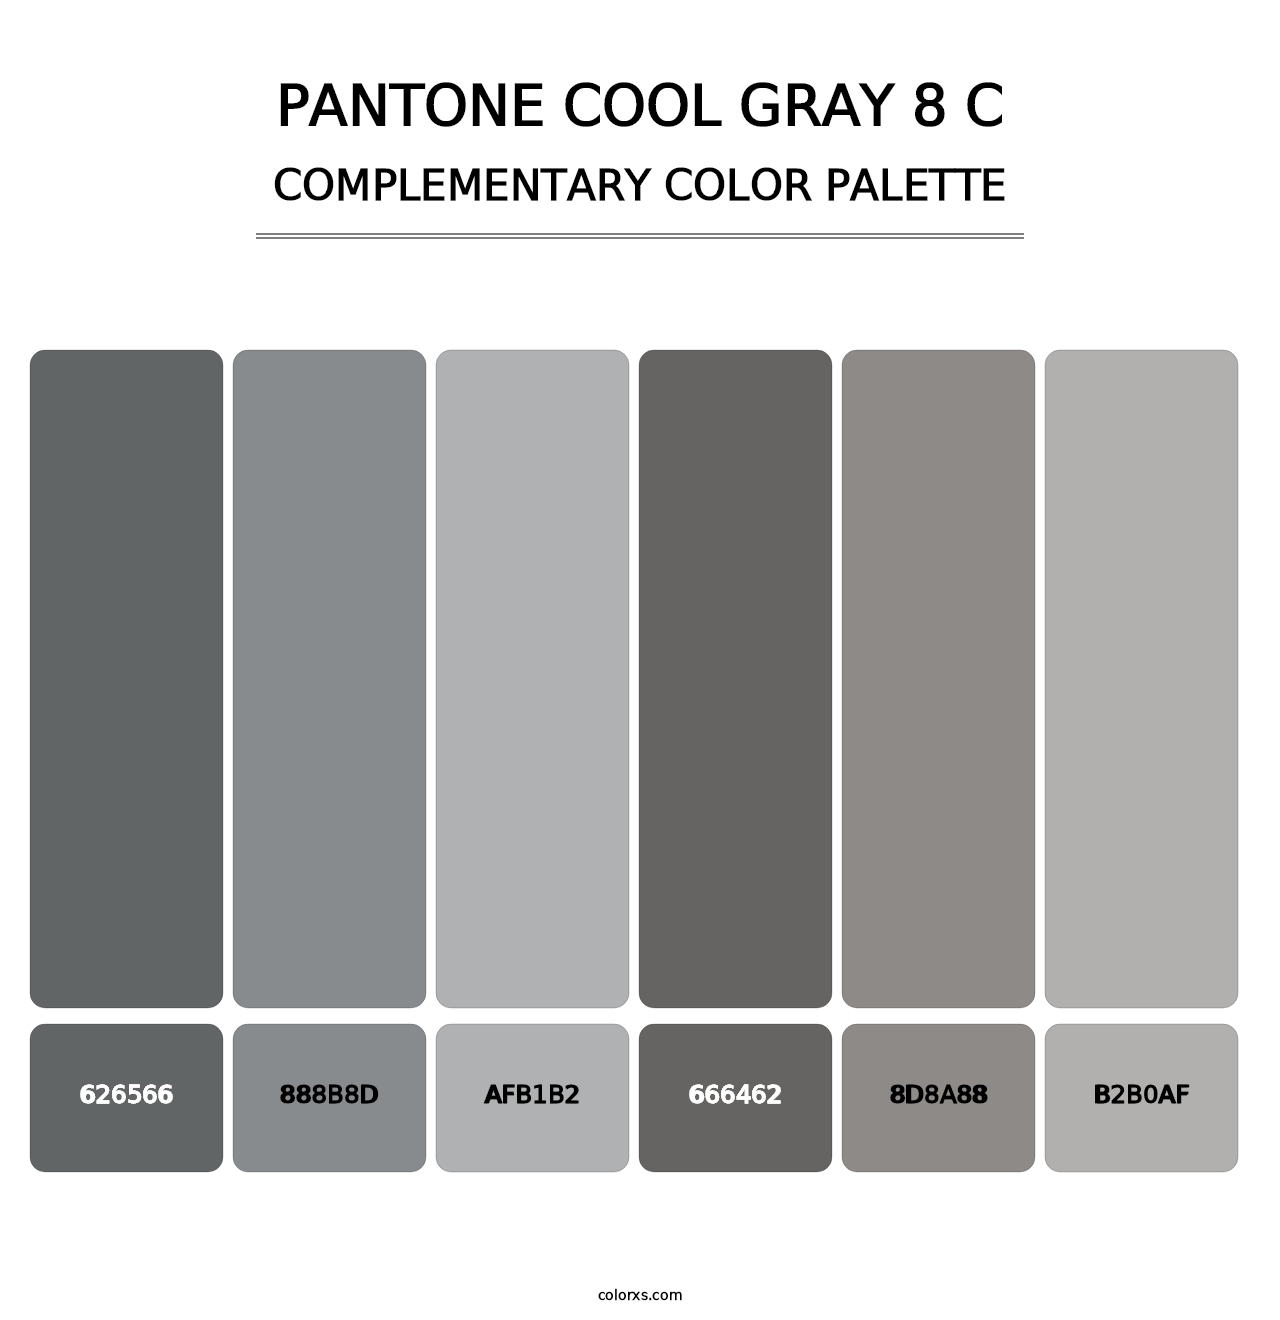 PANTONE Cool Gray 8 C - Complementary Color Palette